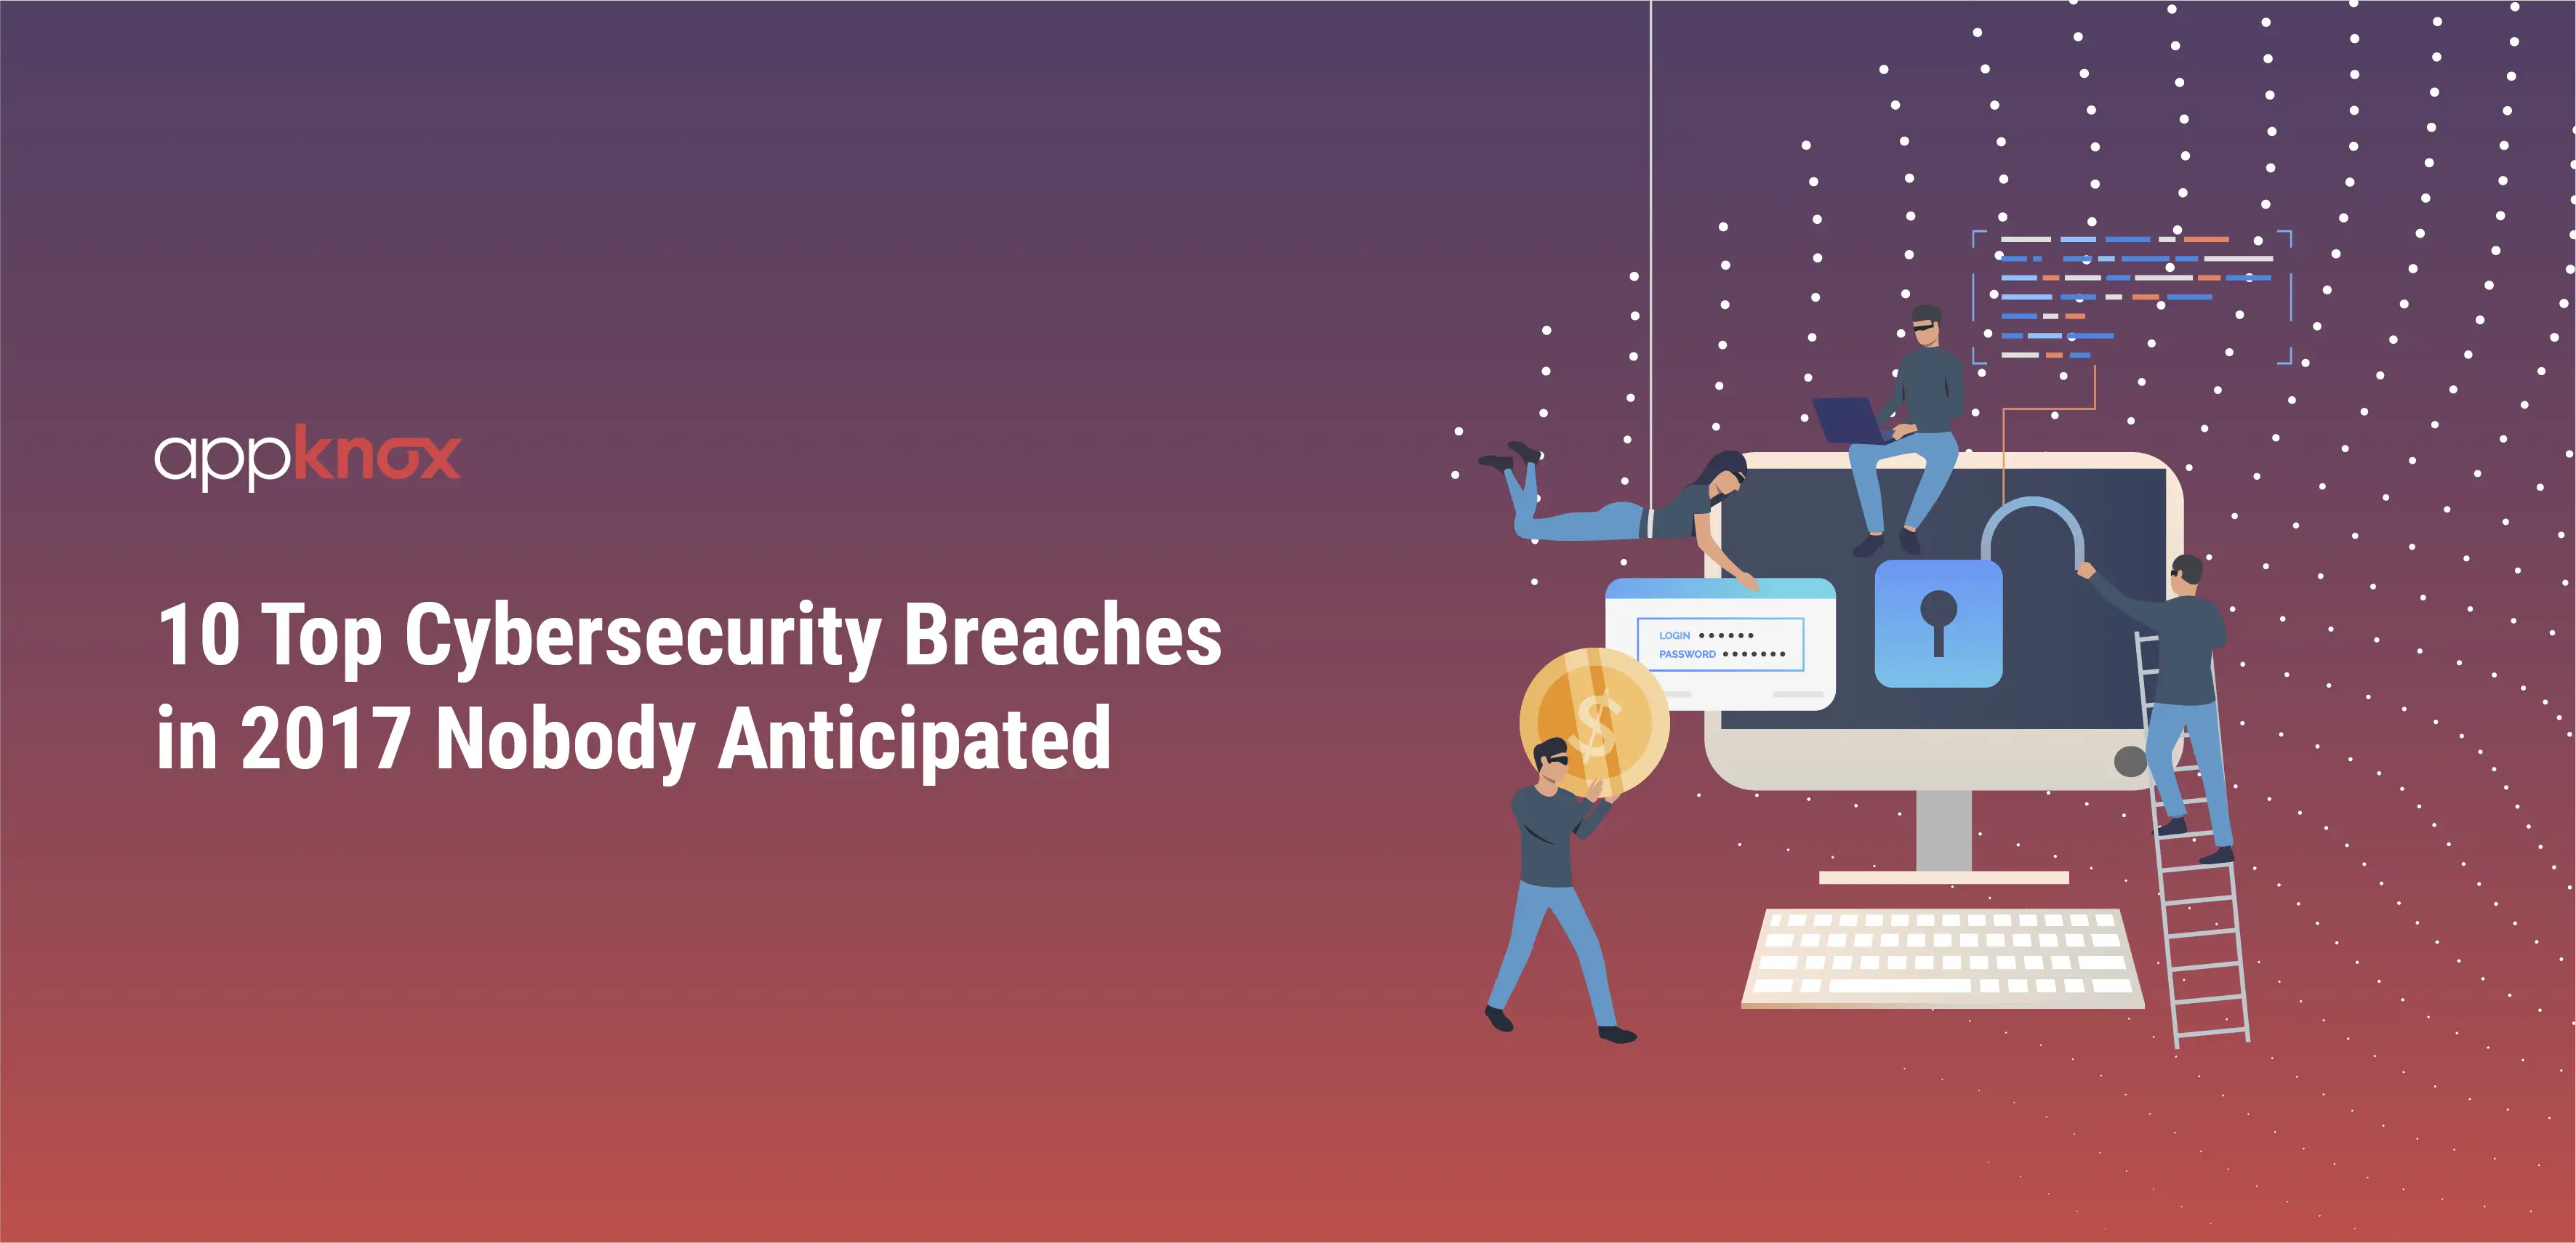 10 Top Cybersecurity Breaches in 2017 Nobody Anticipated